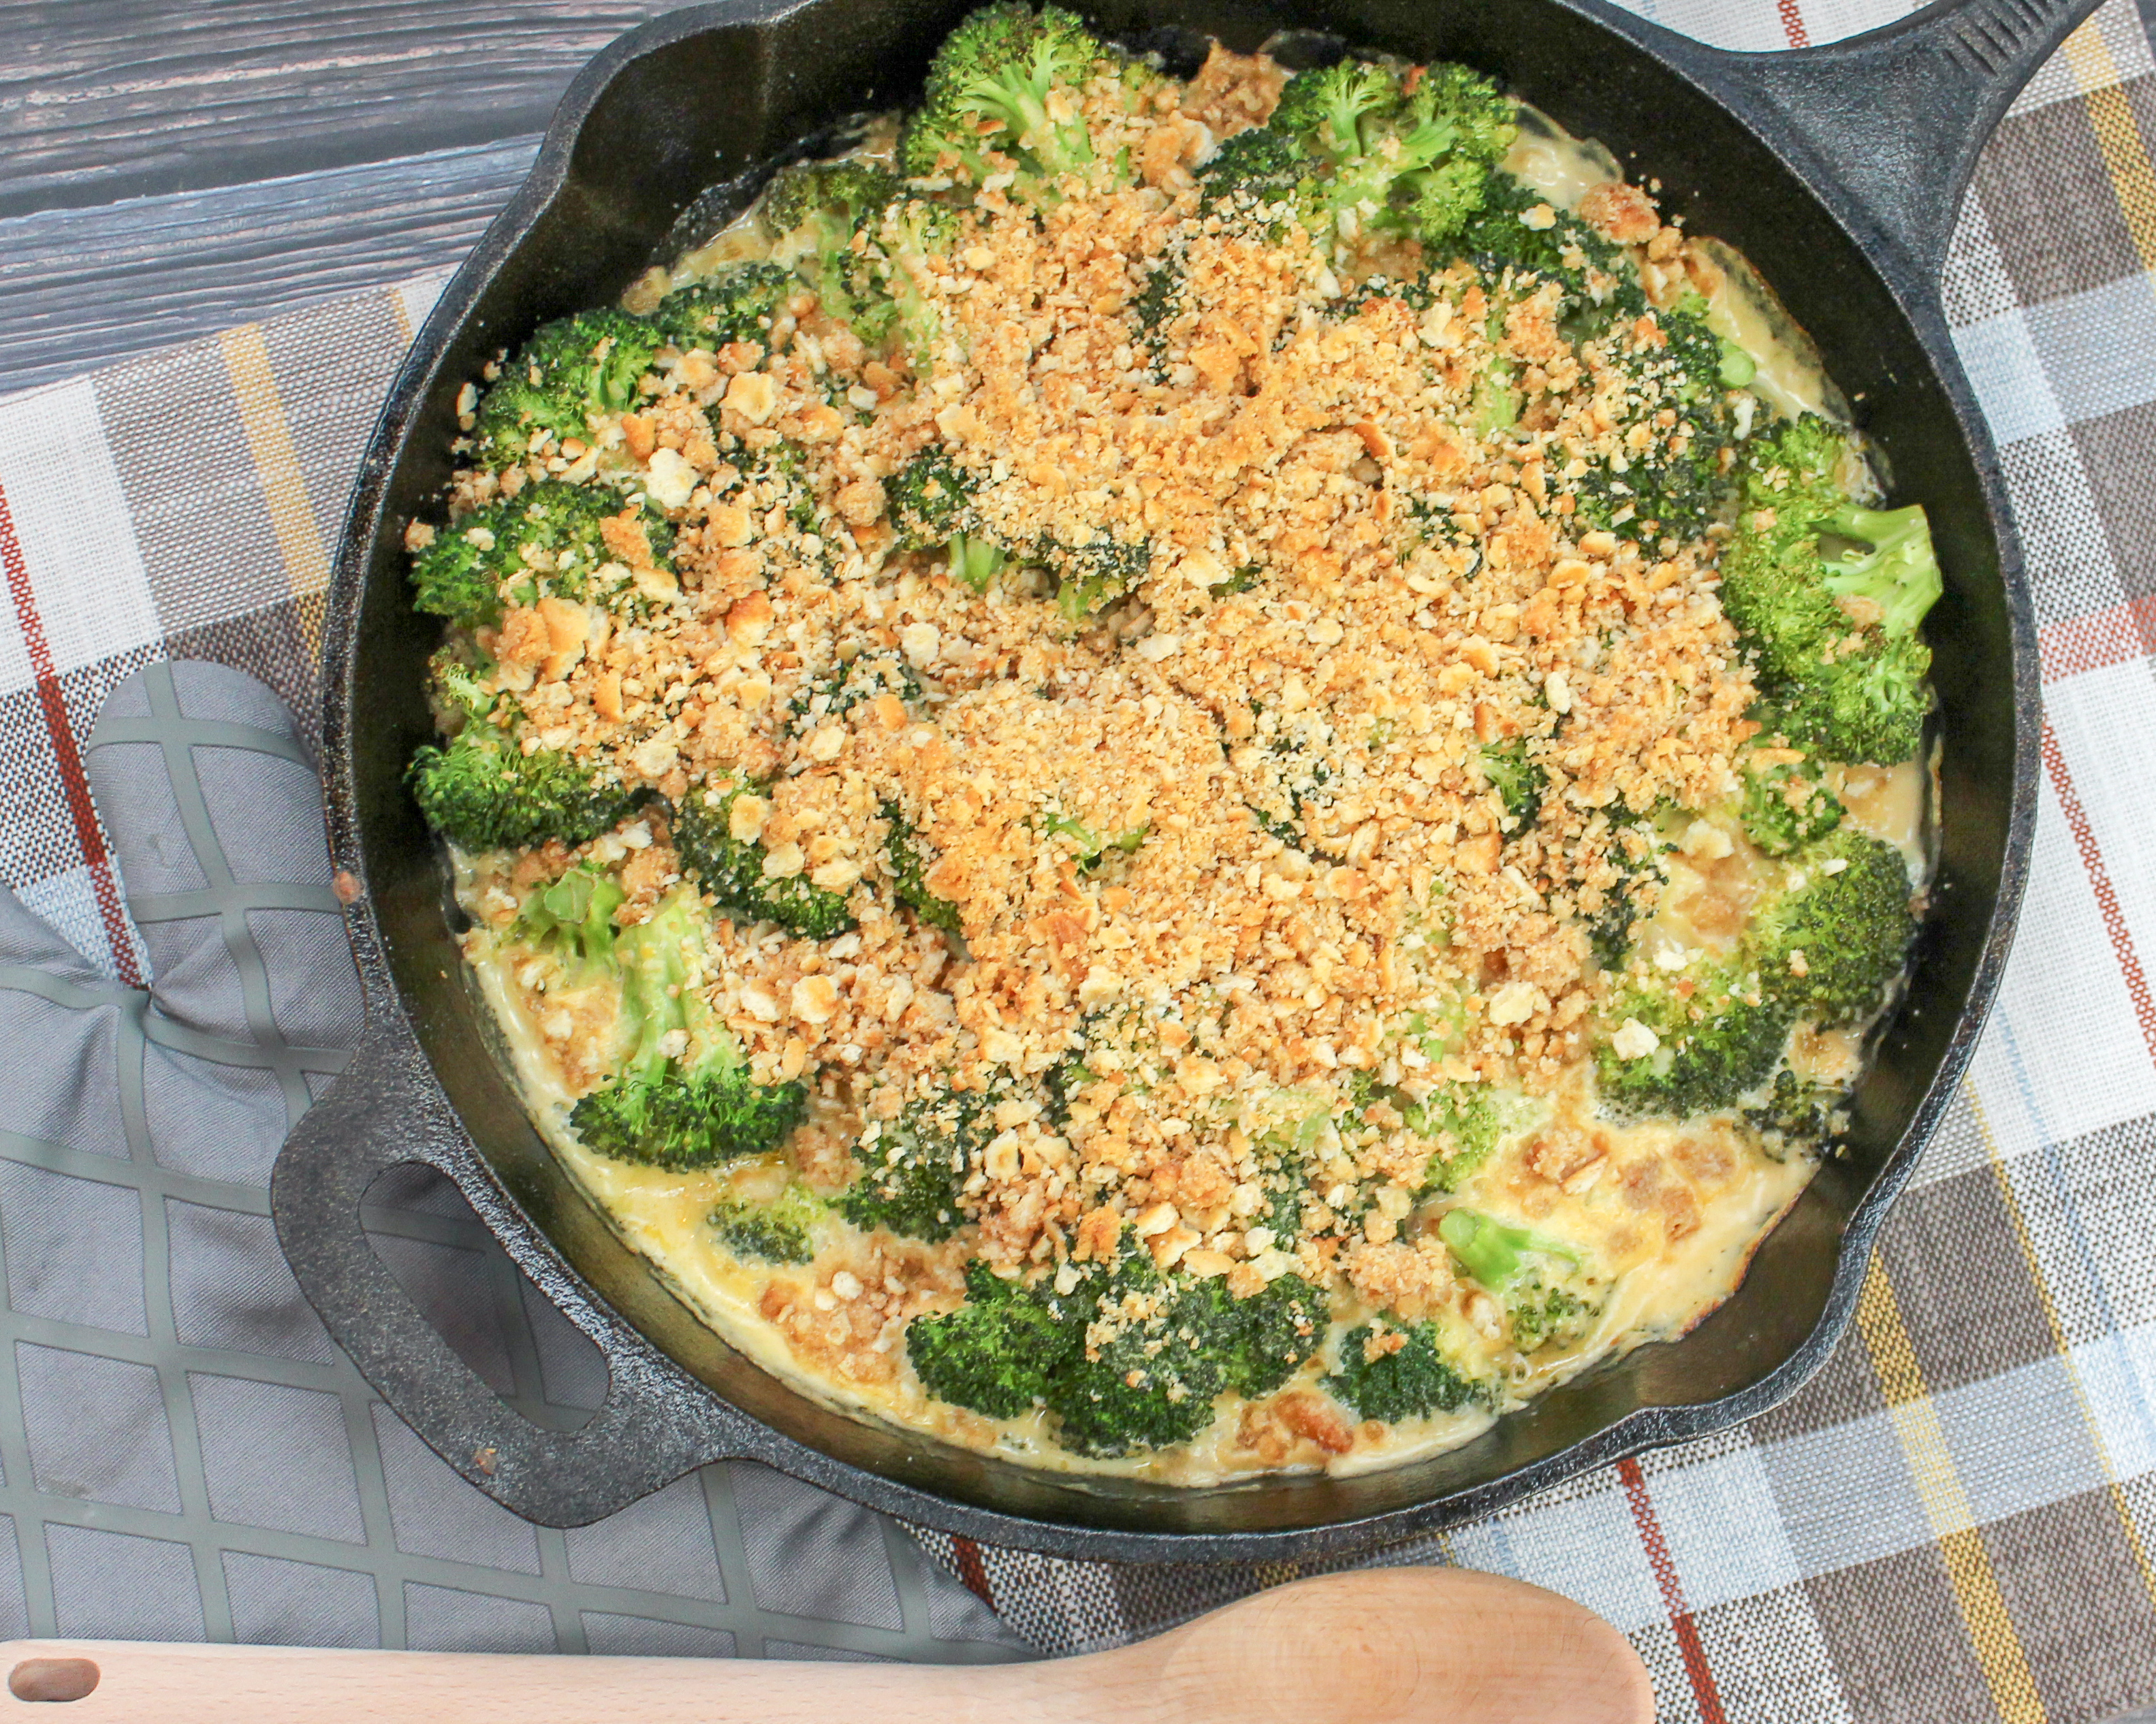 Broccoli florets covered in cheese sauce and topped with crushed crackers. Served in a round black baking pan.